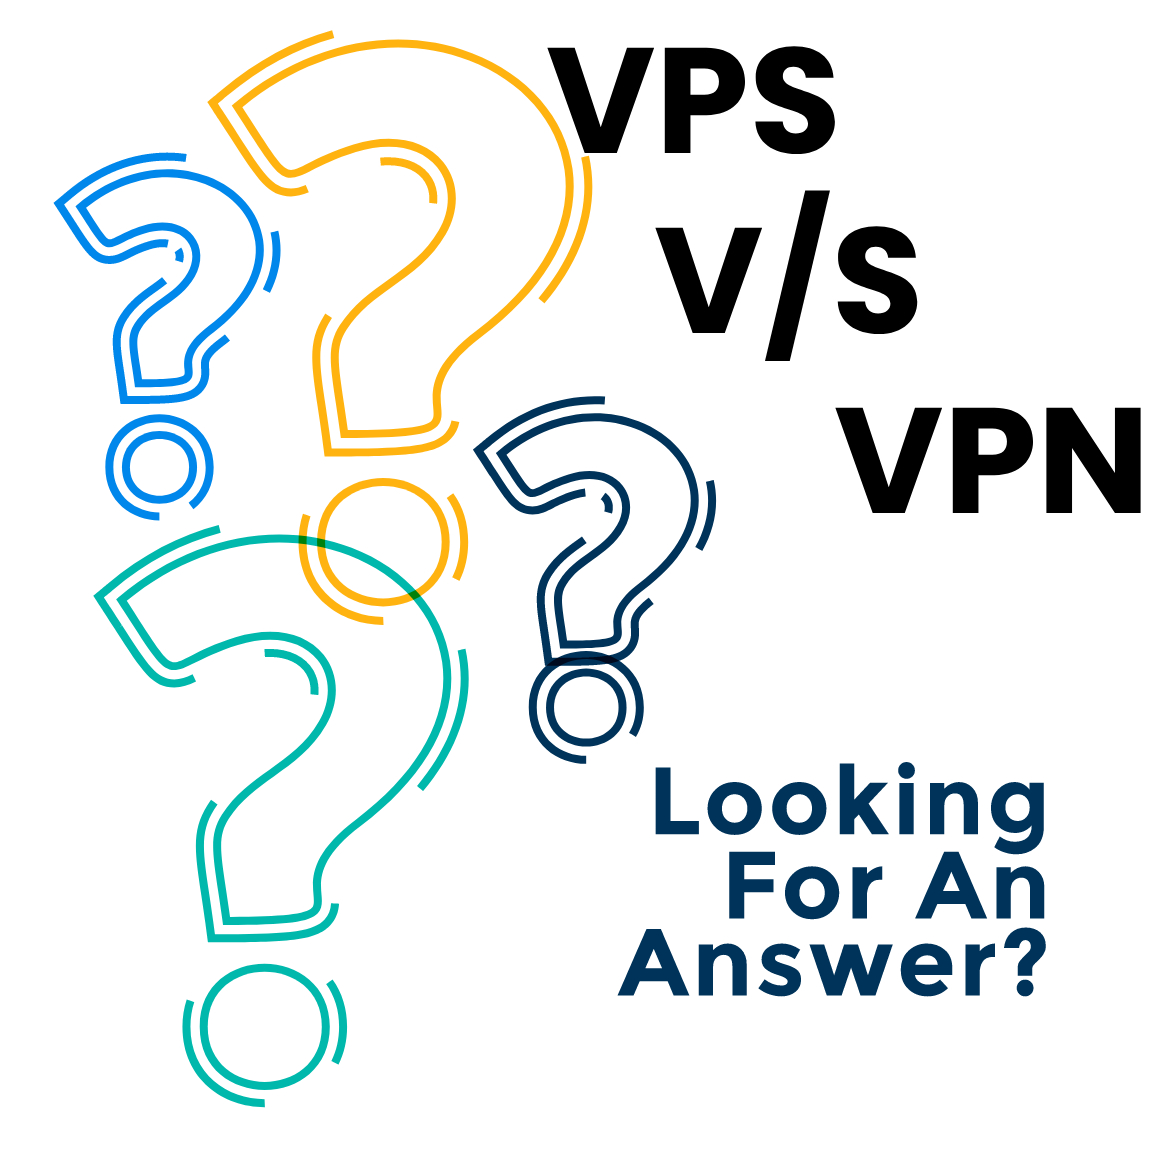 Differnce between VPS and VPN